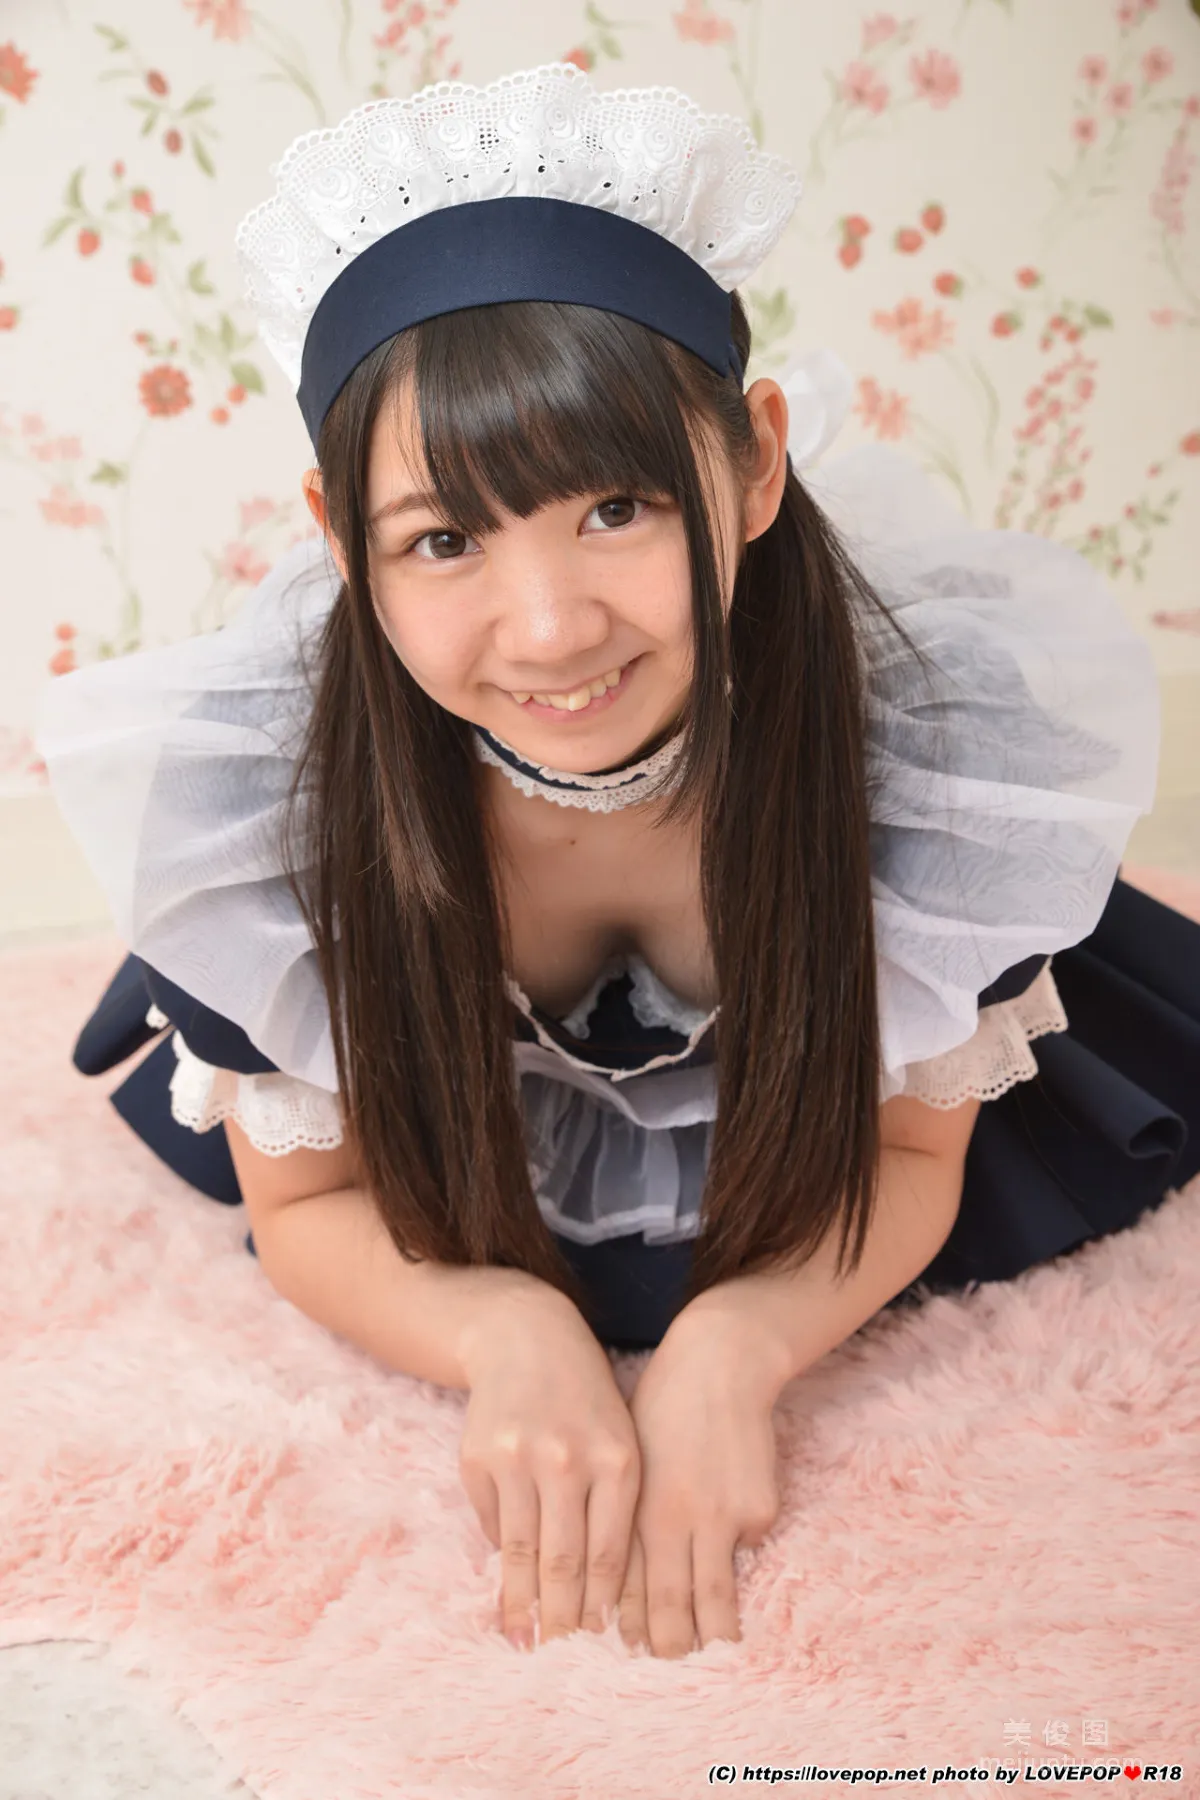 [LOVEPOP] Special Maid Collection - 白井ゆずか Photoset 015